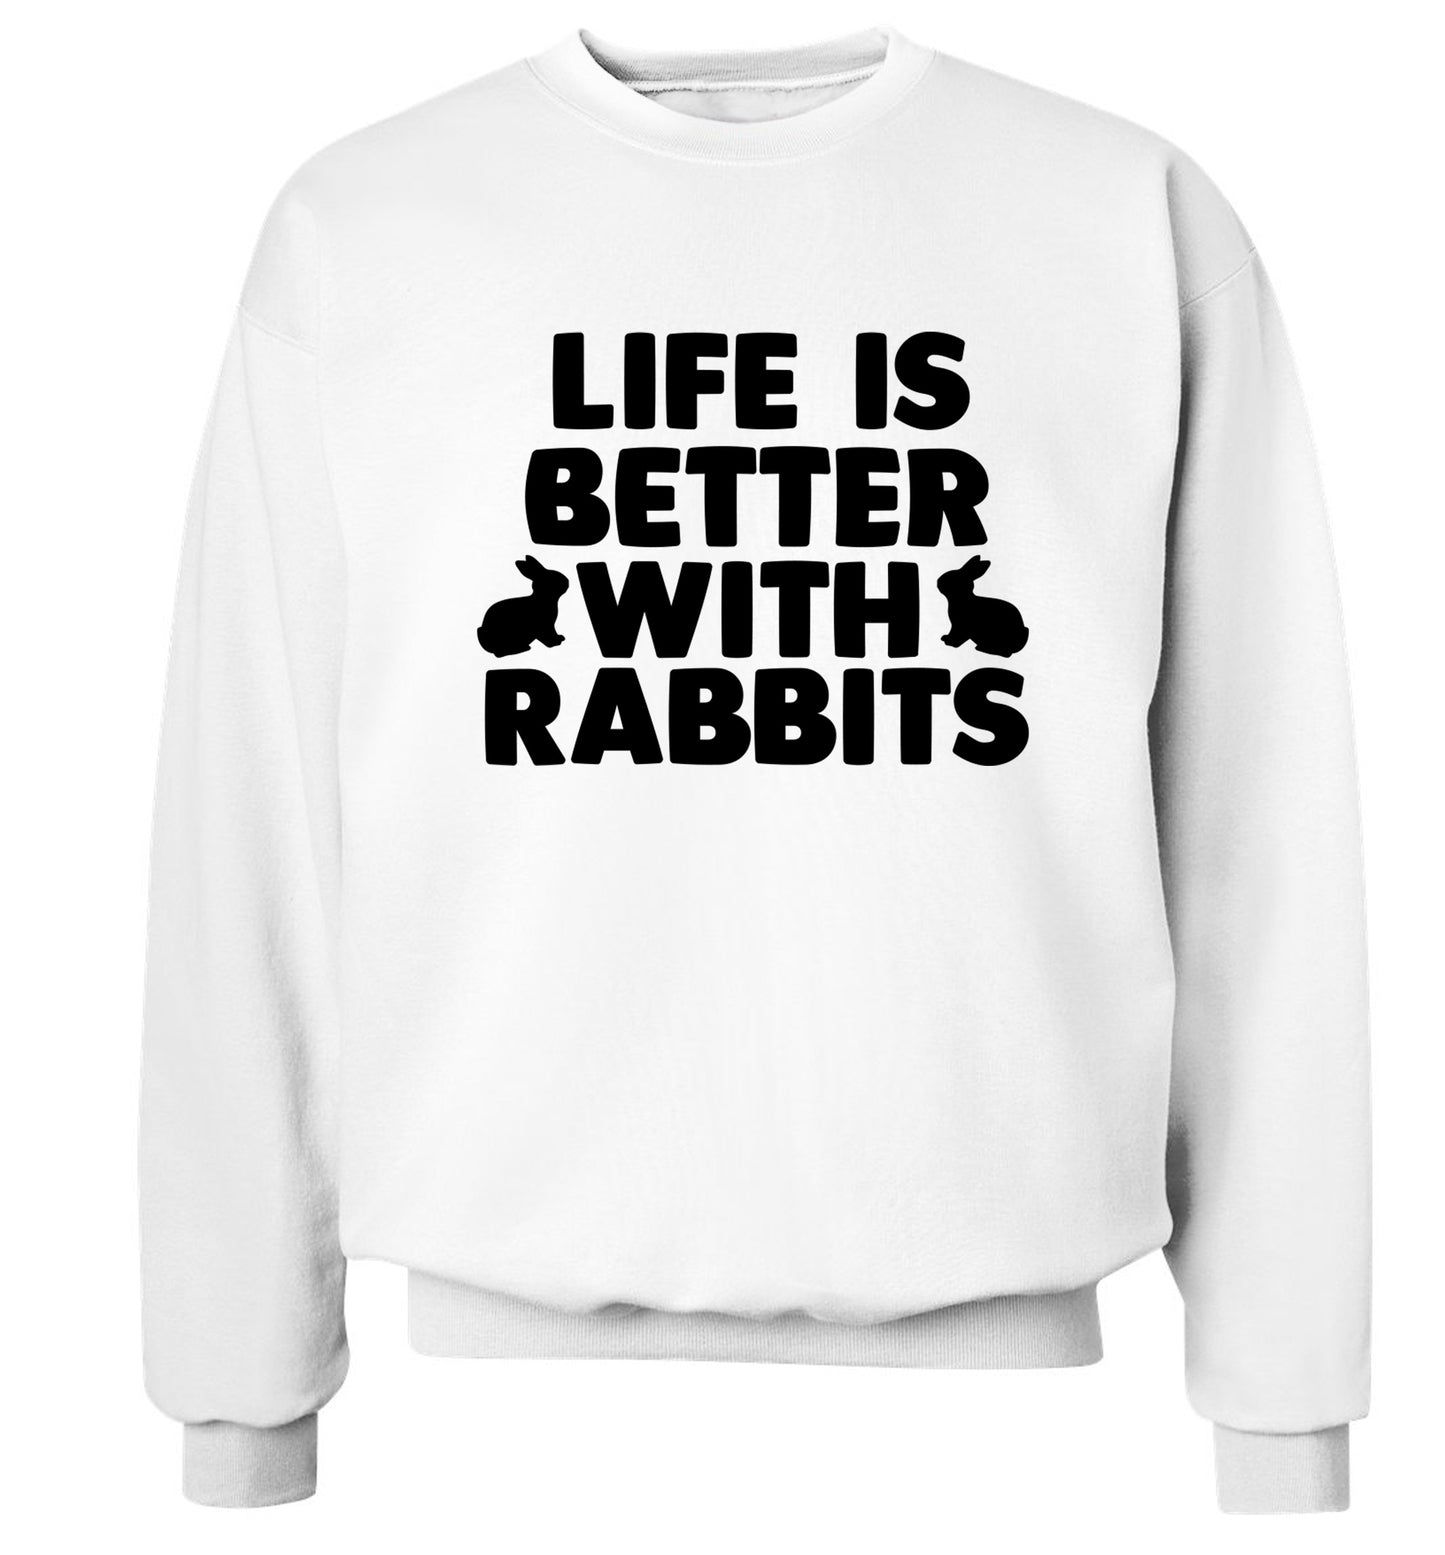 Life is better with rabbits Adult's unisex white  sweater 2XL